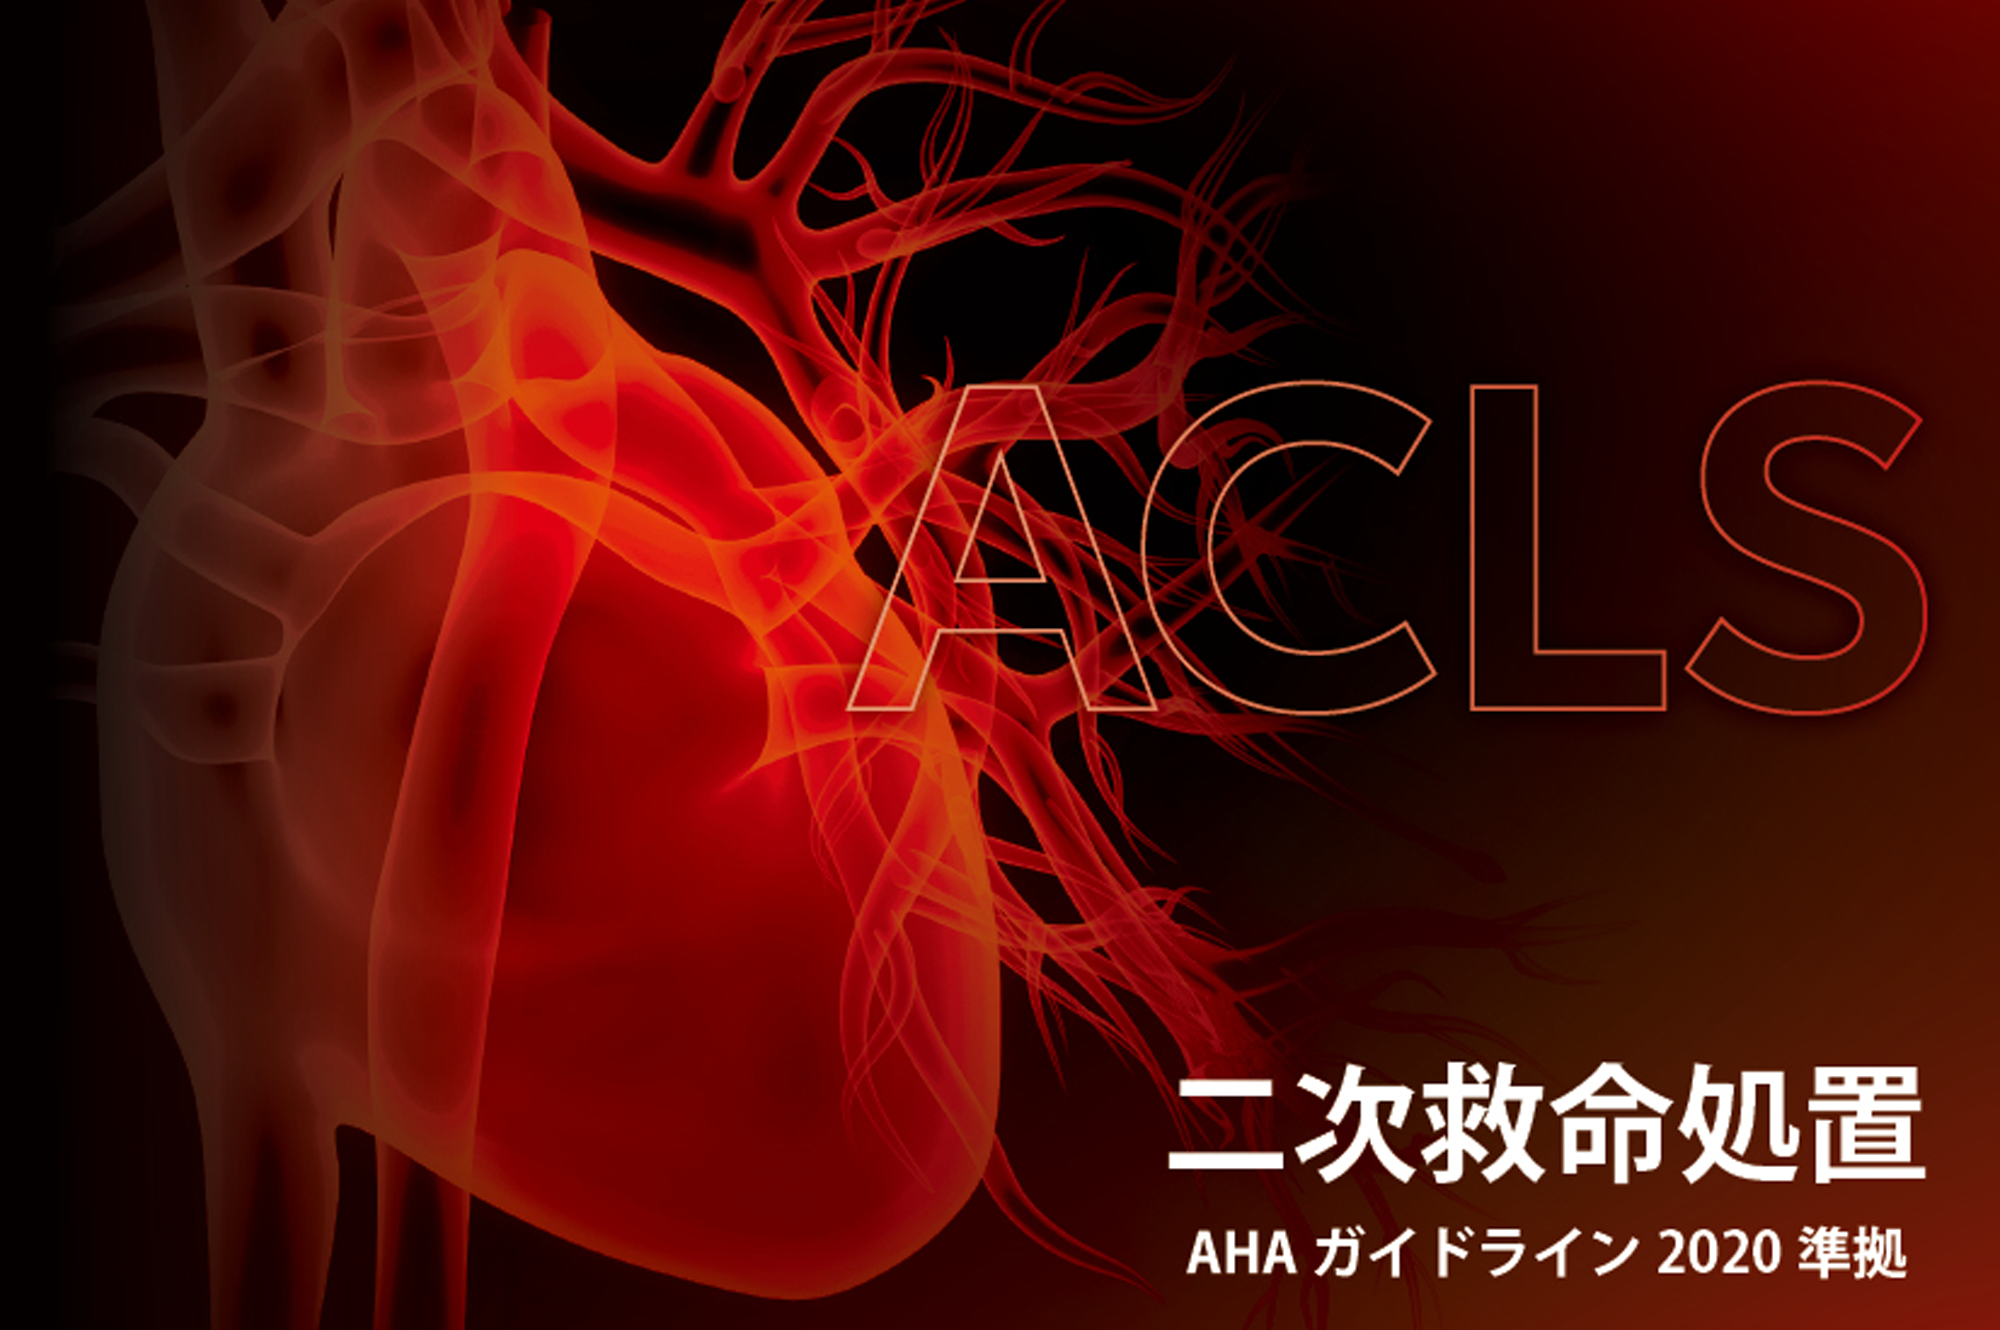 JCS-ITC HeartCode ACLS part2